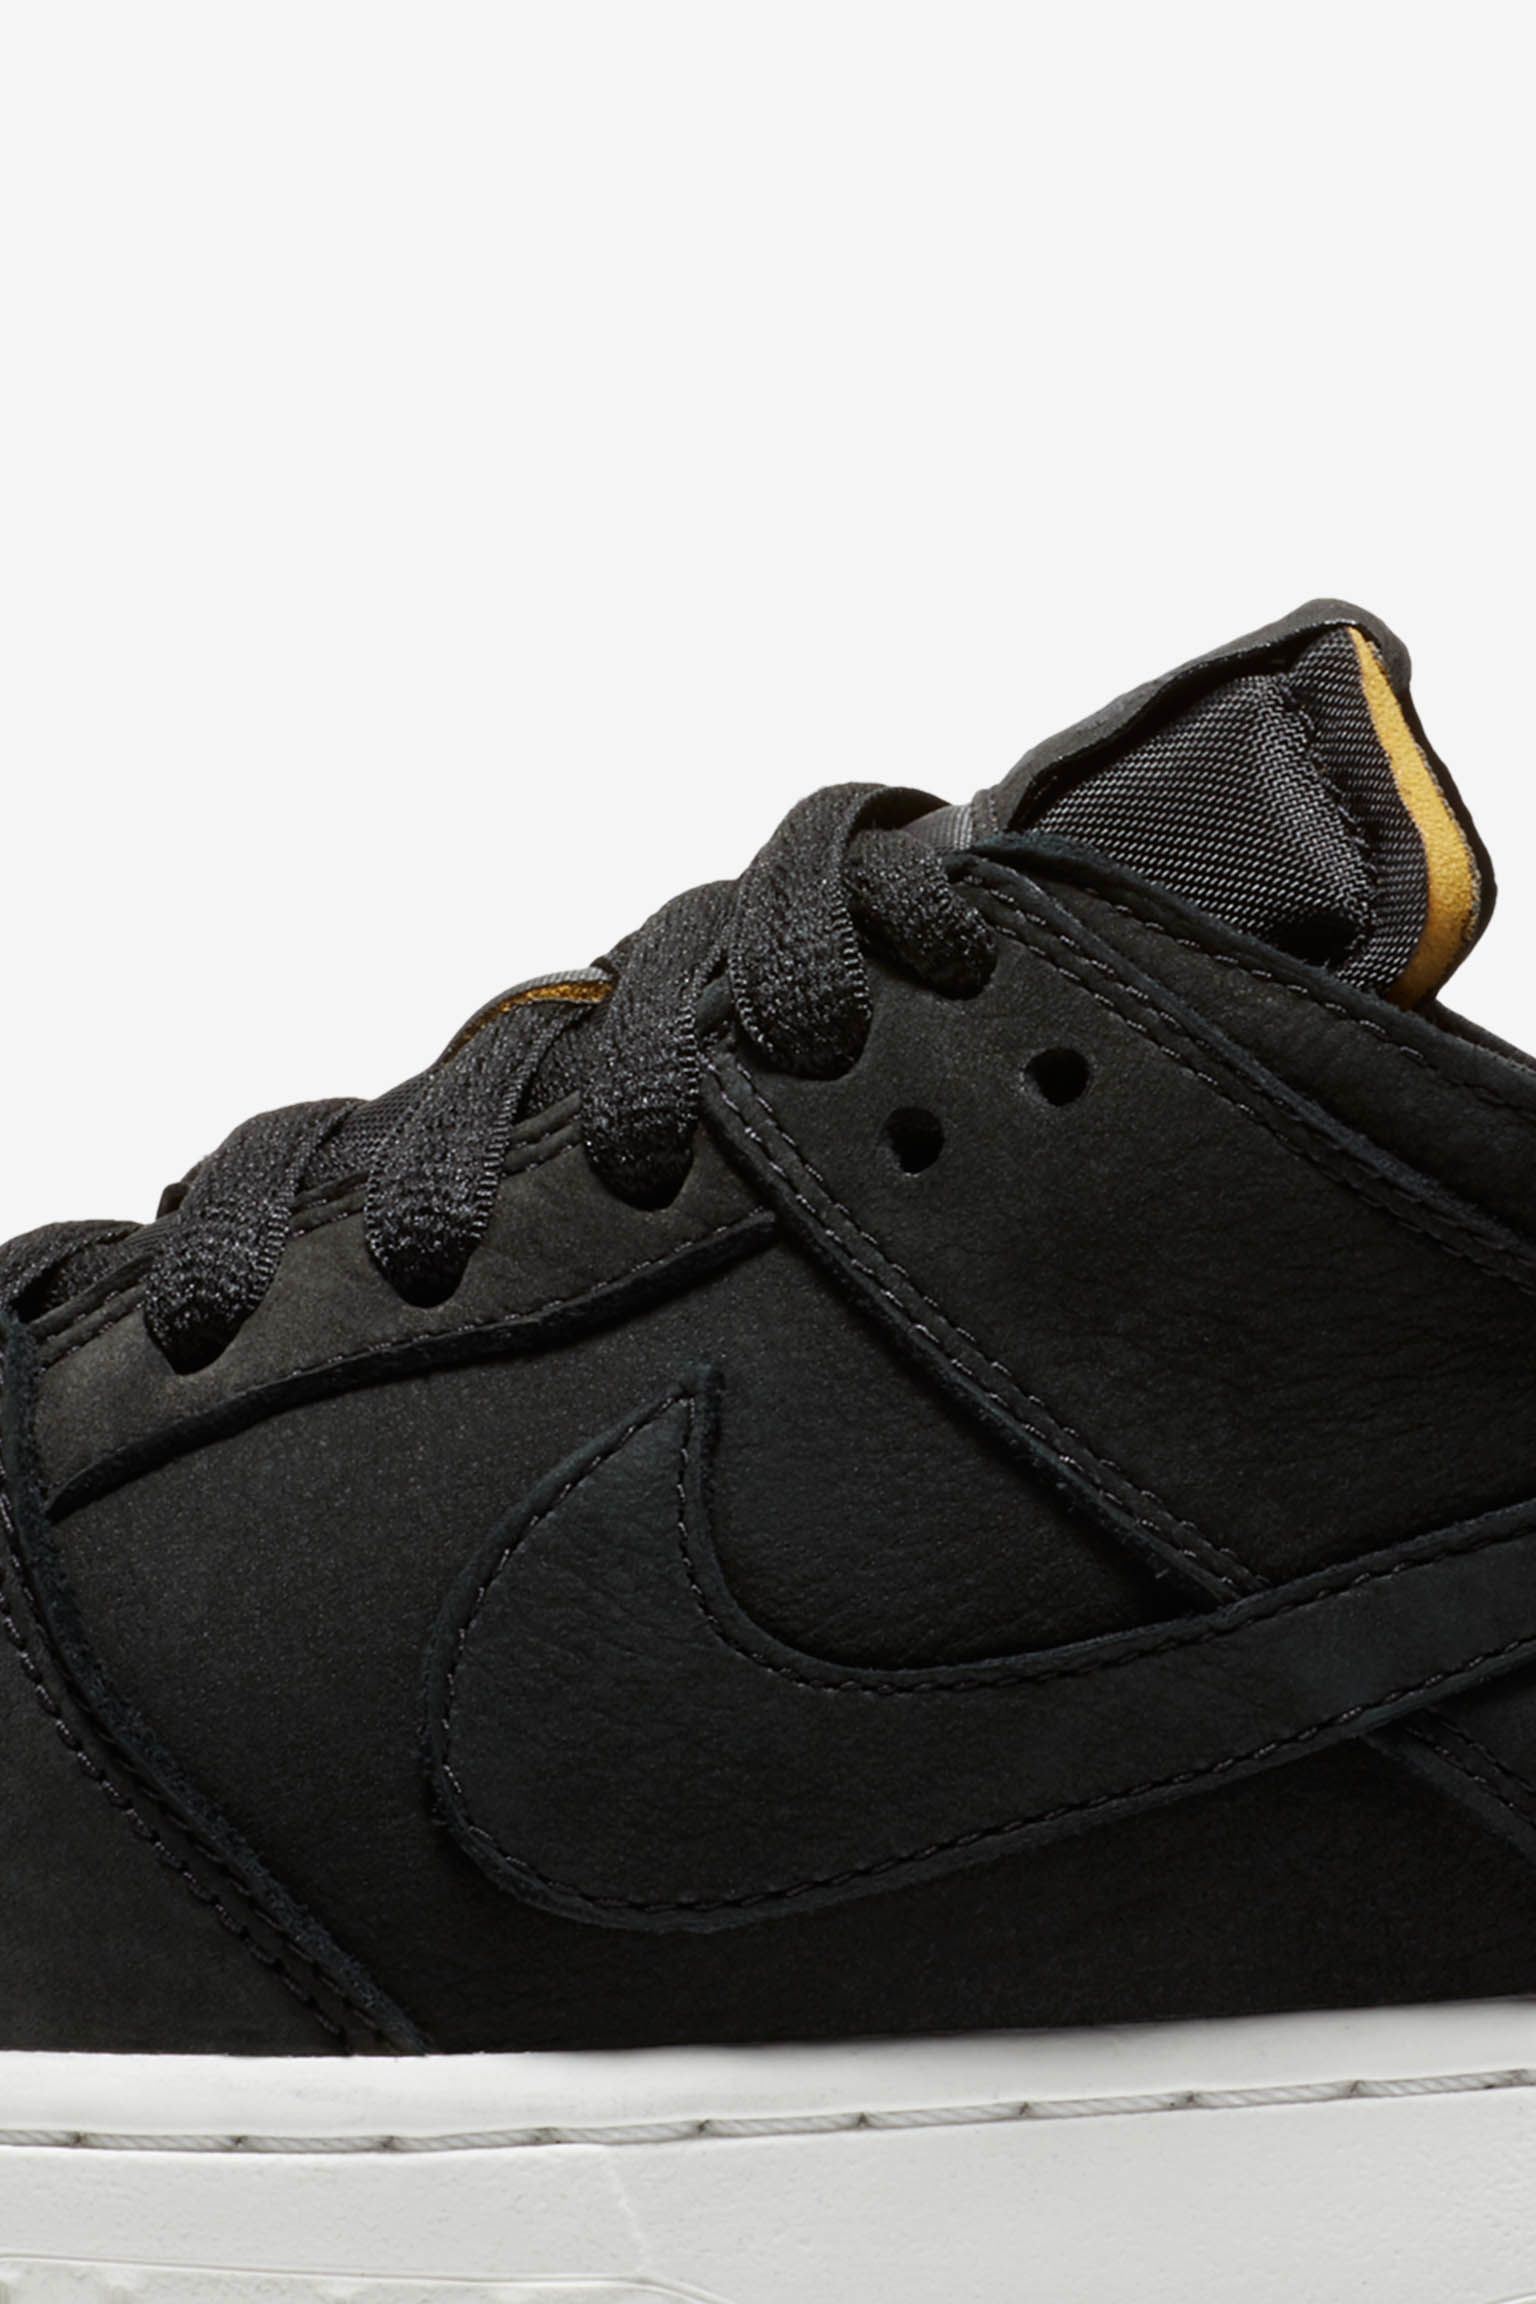 Nike SB Zoom Dunk Low Pro Decon 'Black & Anthracite' Release Date 